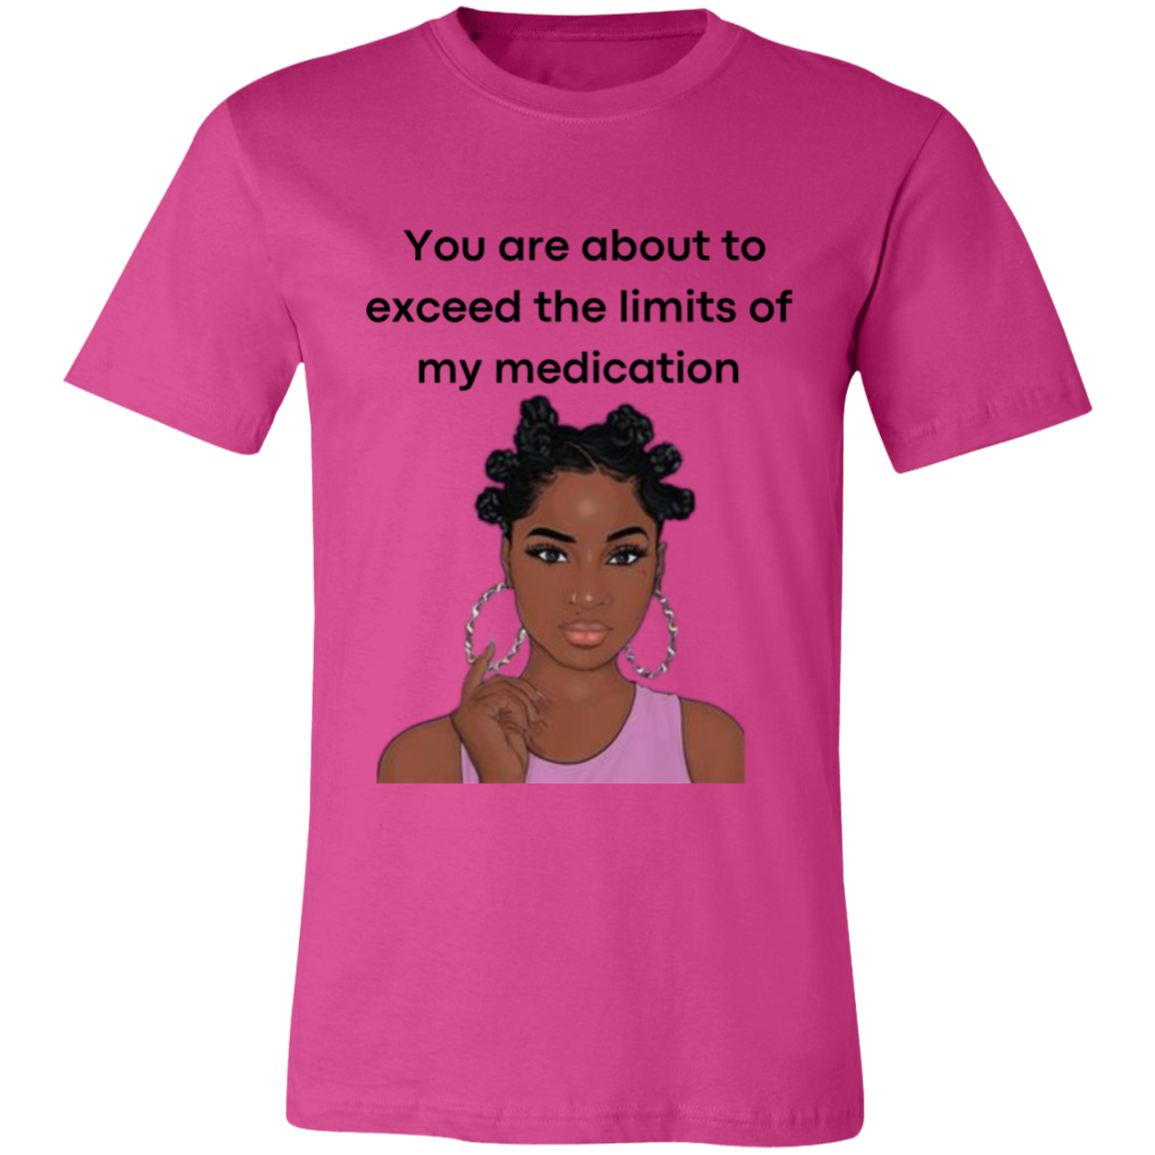 You Are About to Exceed the Limits of My Medication Ladies Jersey Short-Sleeve T-Shirt